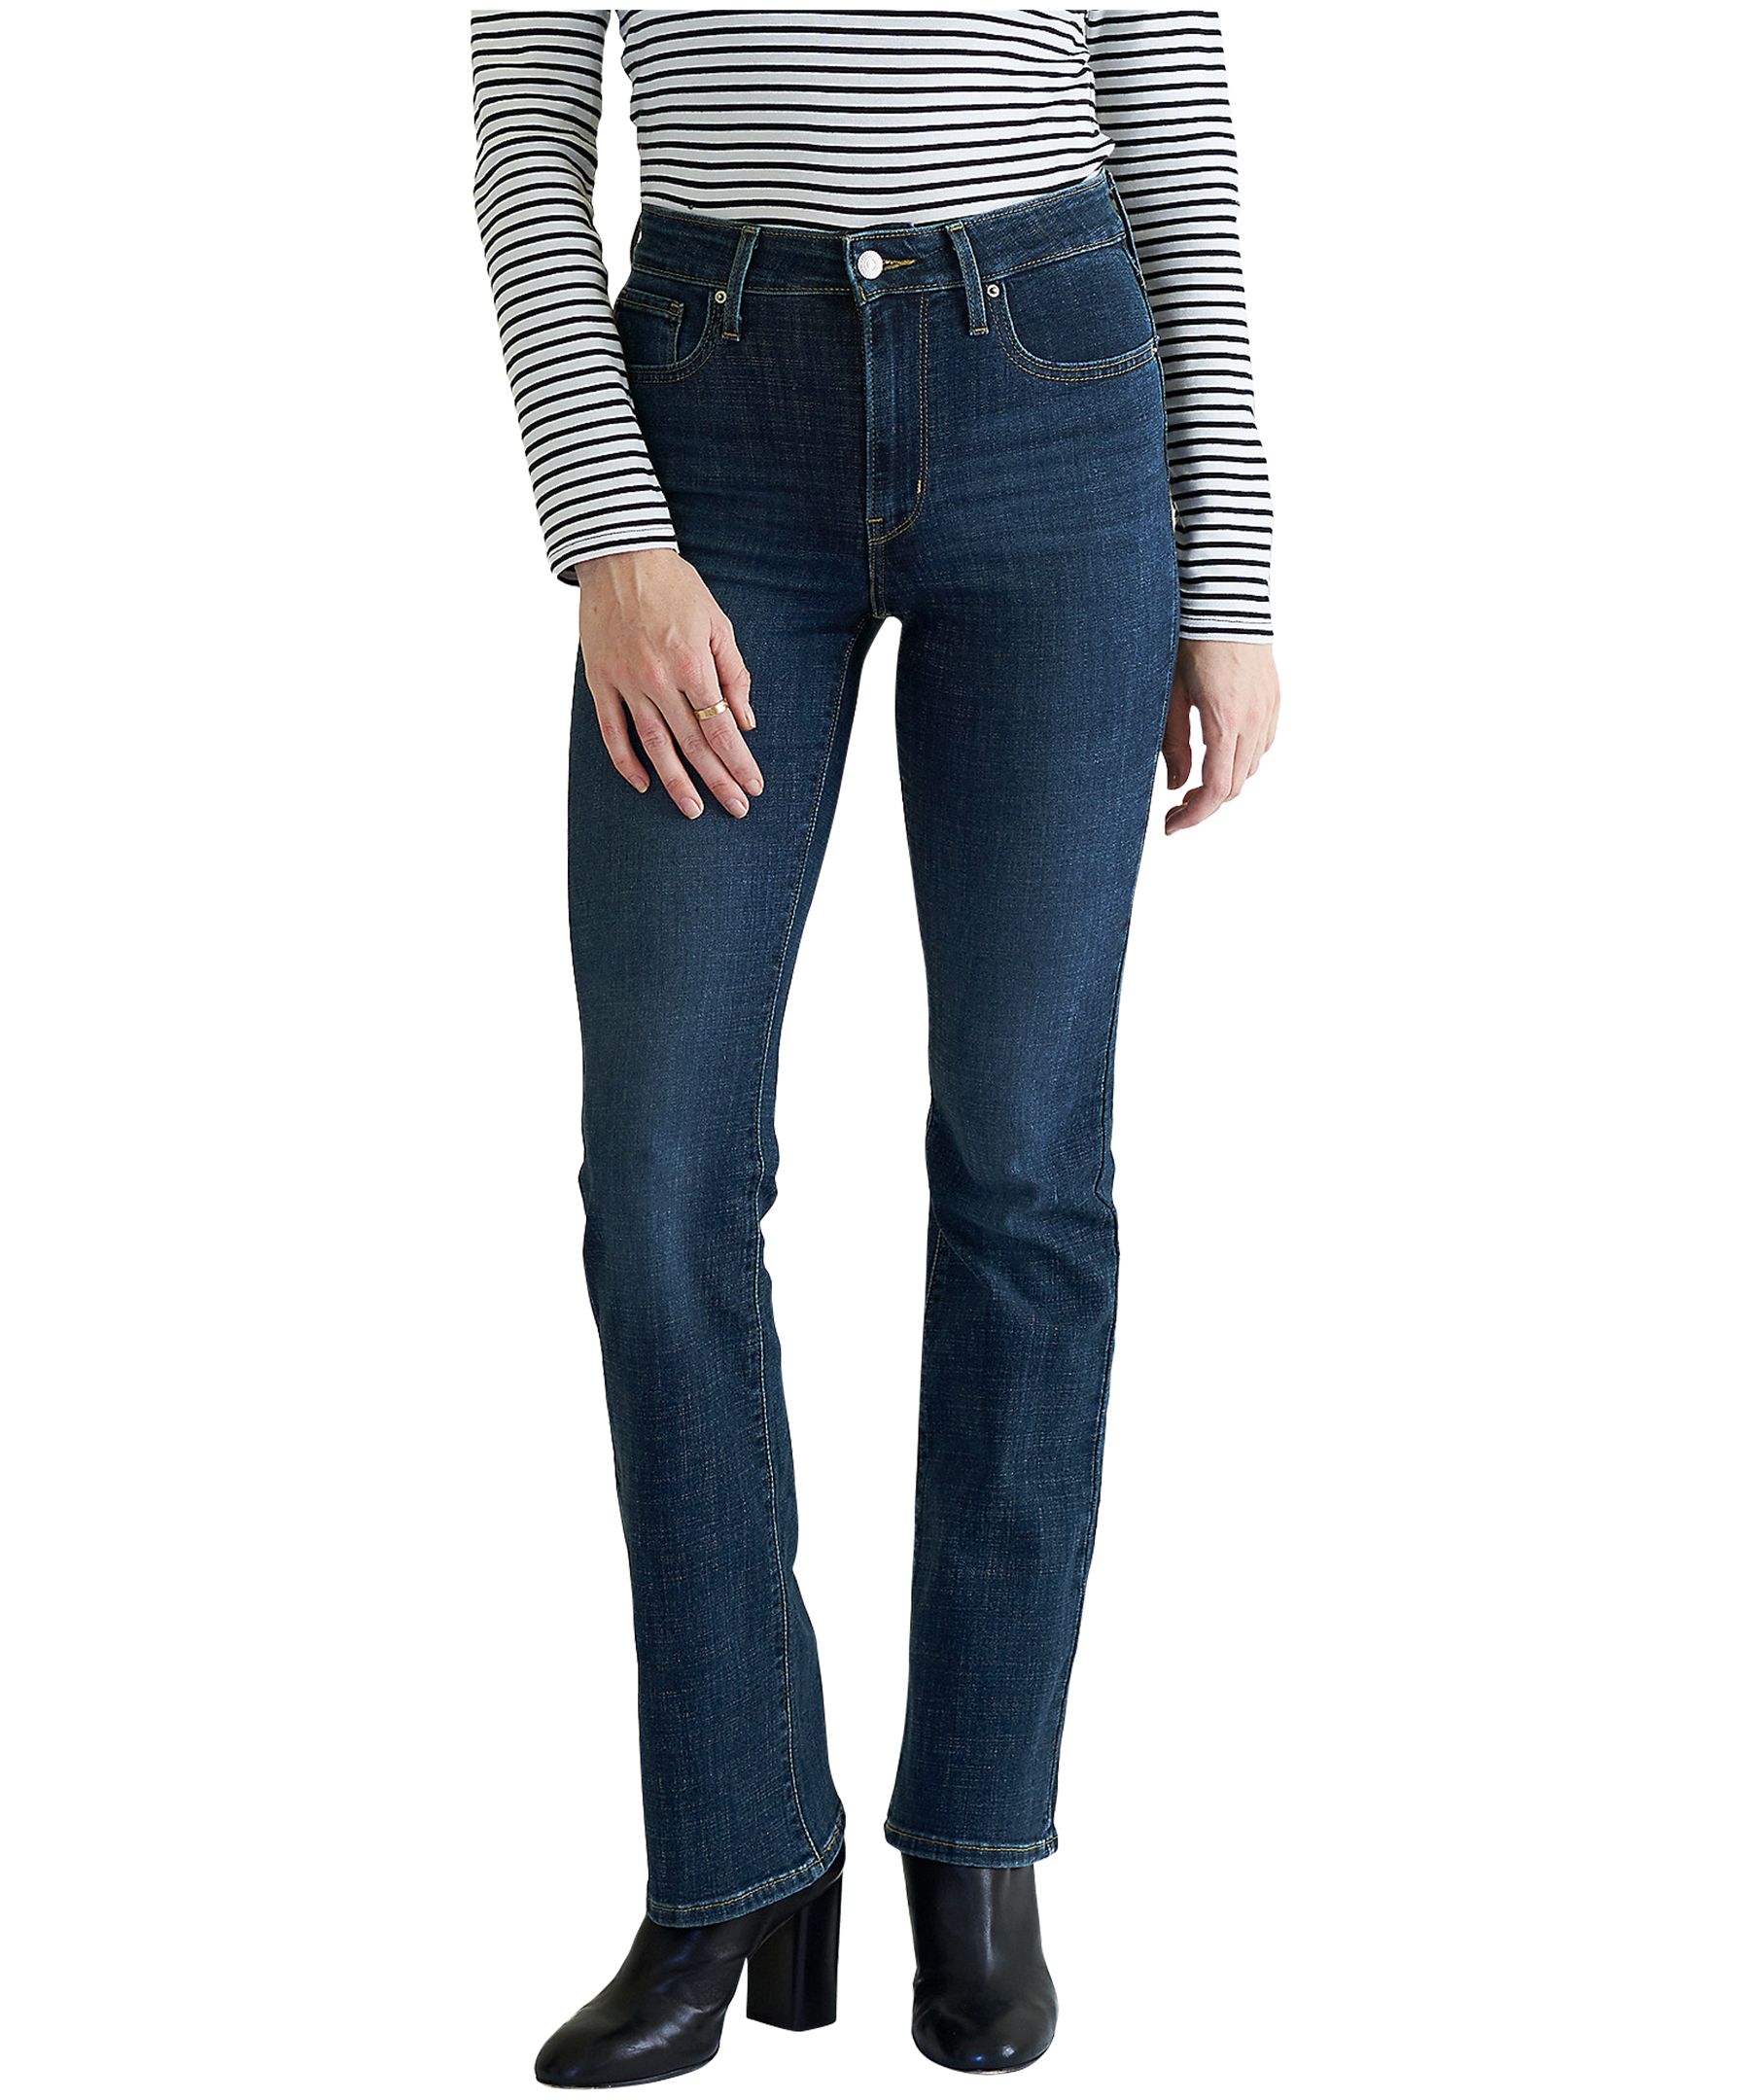 Bootcut jeans for girls, Slim bootcut jeans women's